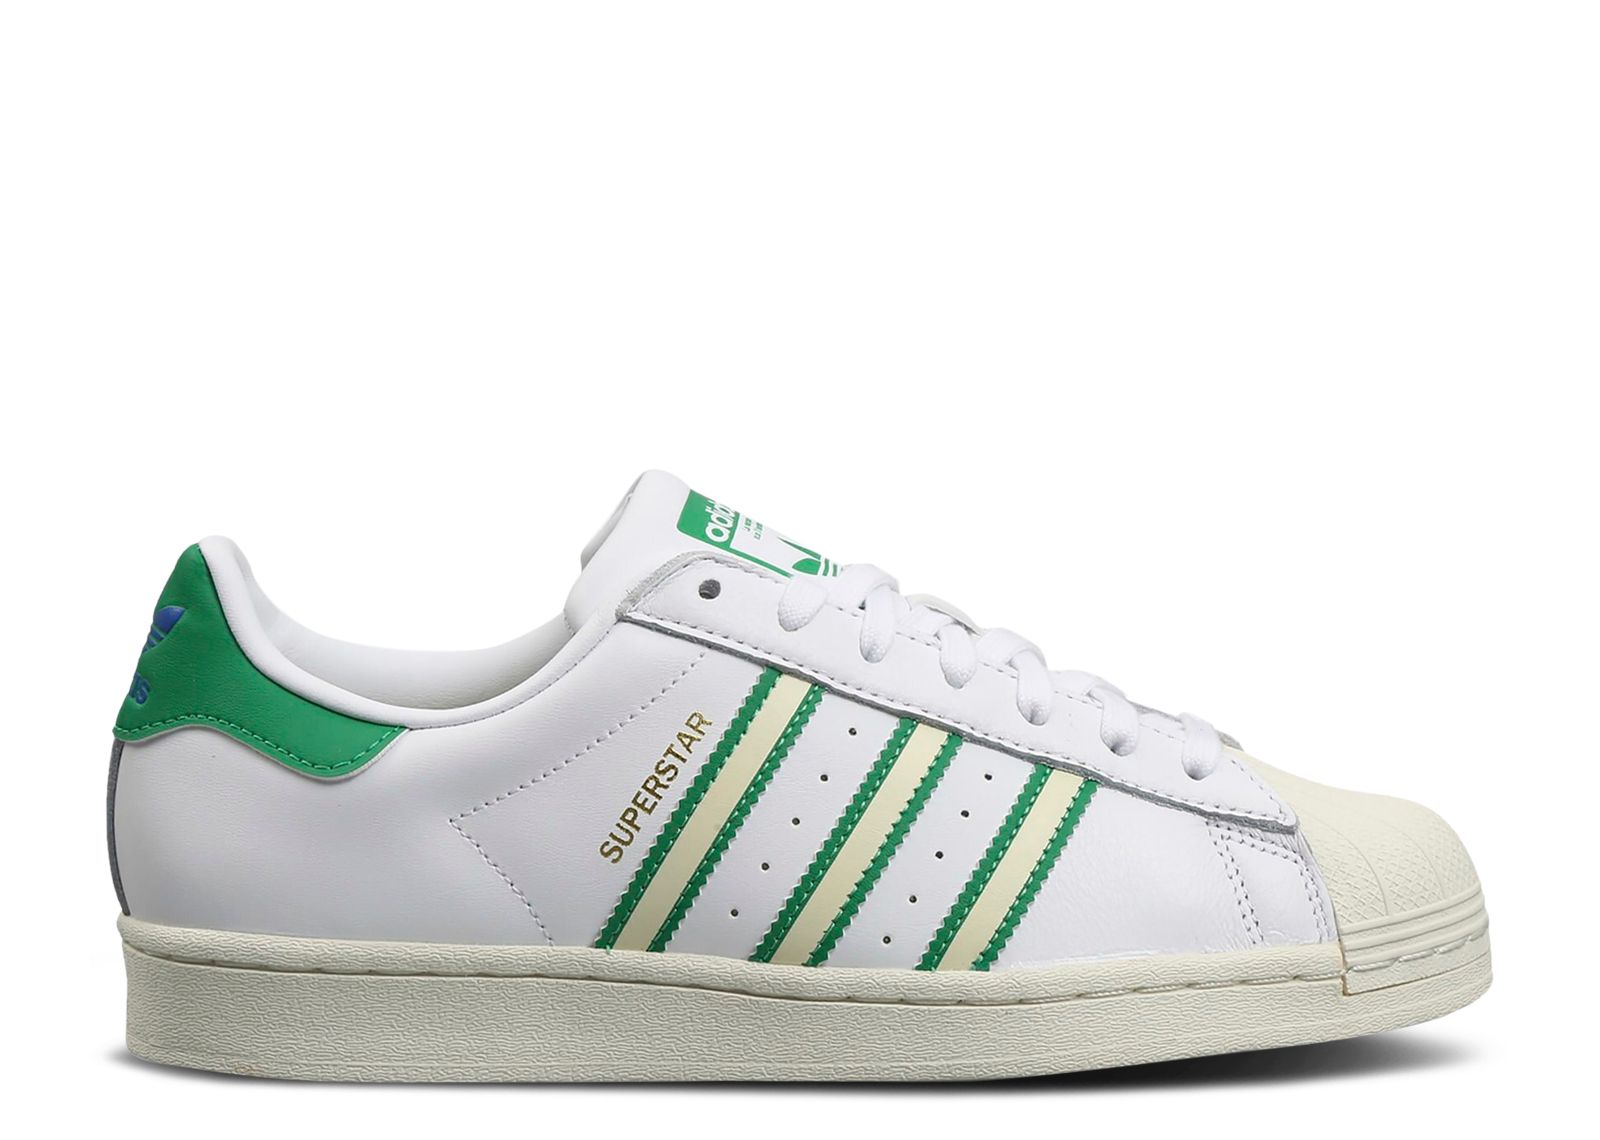 Superstar 'Team Colors - White Green'